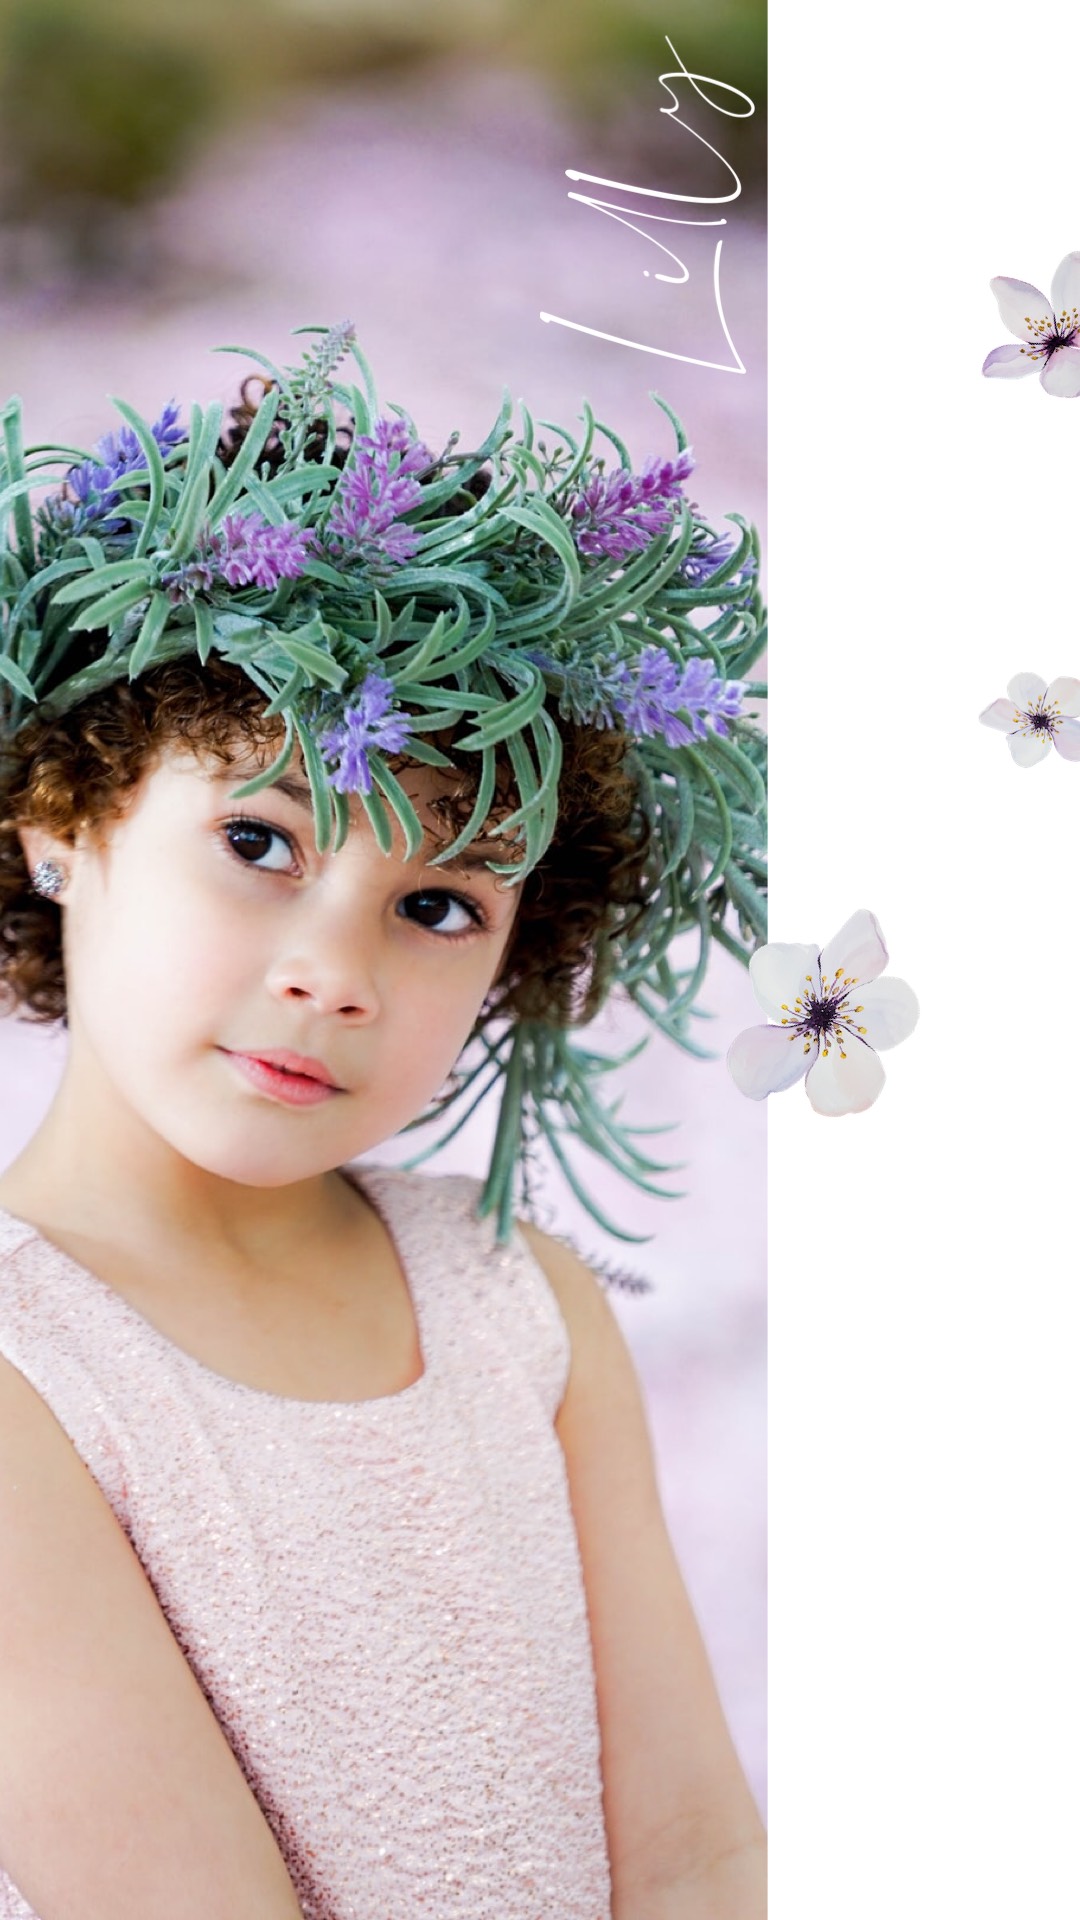 A Little Girl With A Flower Crown On Her Head Spring Story Template